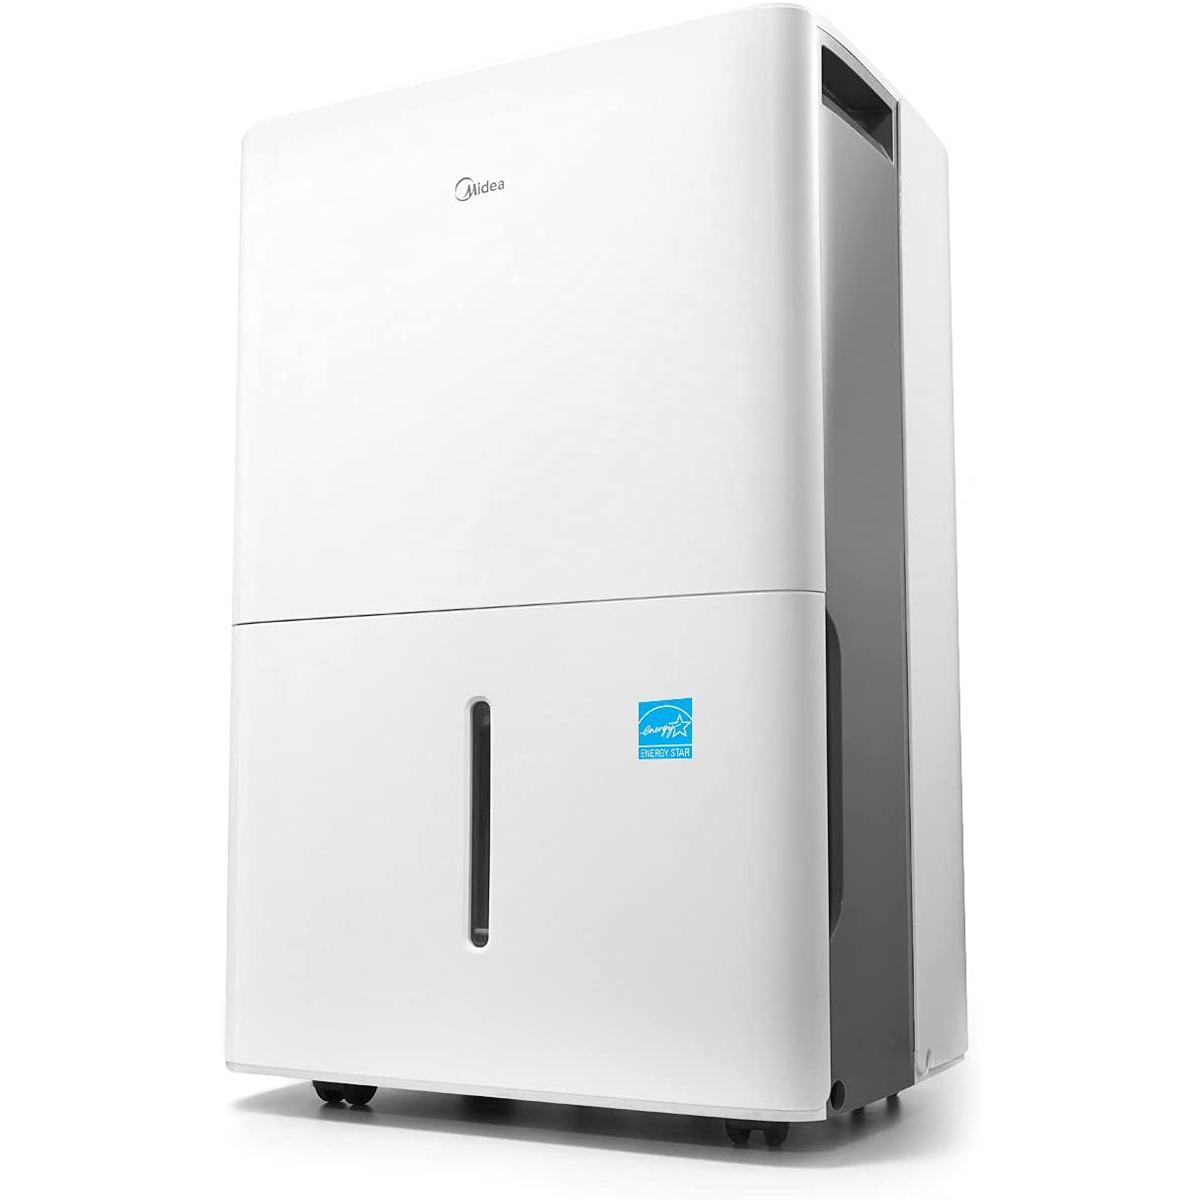 Midea 4500 BTU Dehumidifier with Pup for $179.99 Shipped